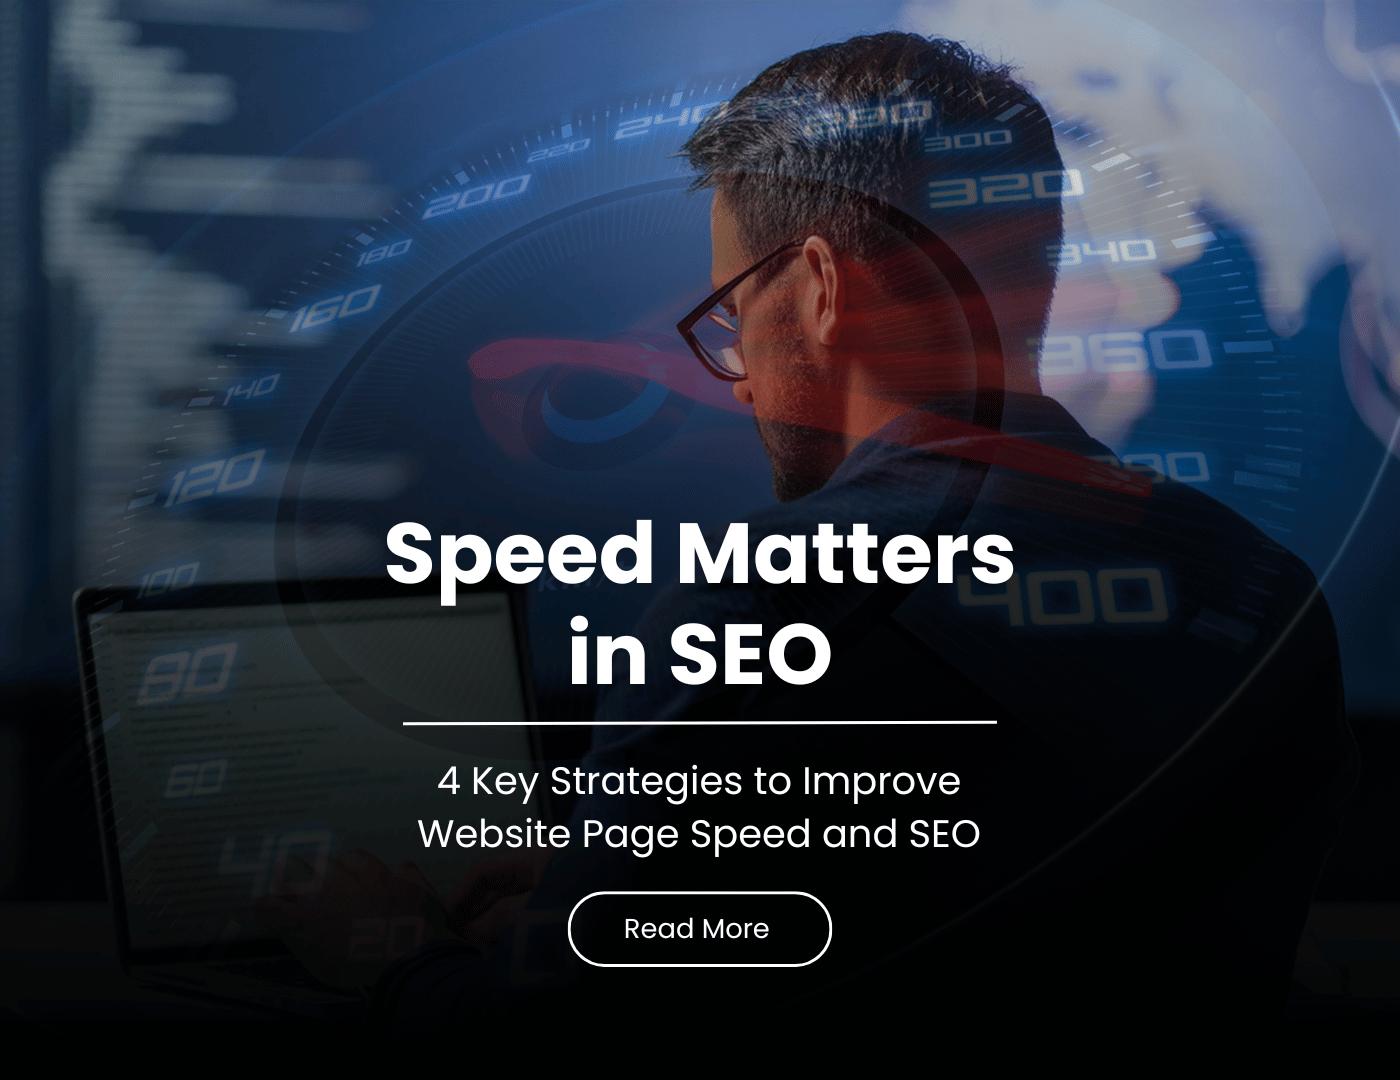 4 Key Strategies to Improve Website Page Speed and SEO